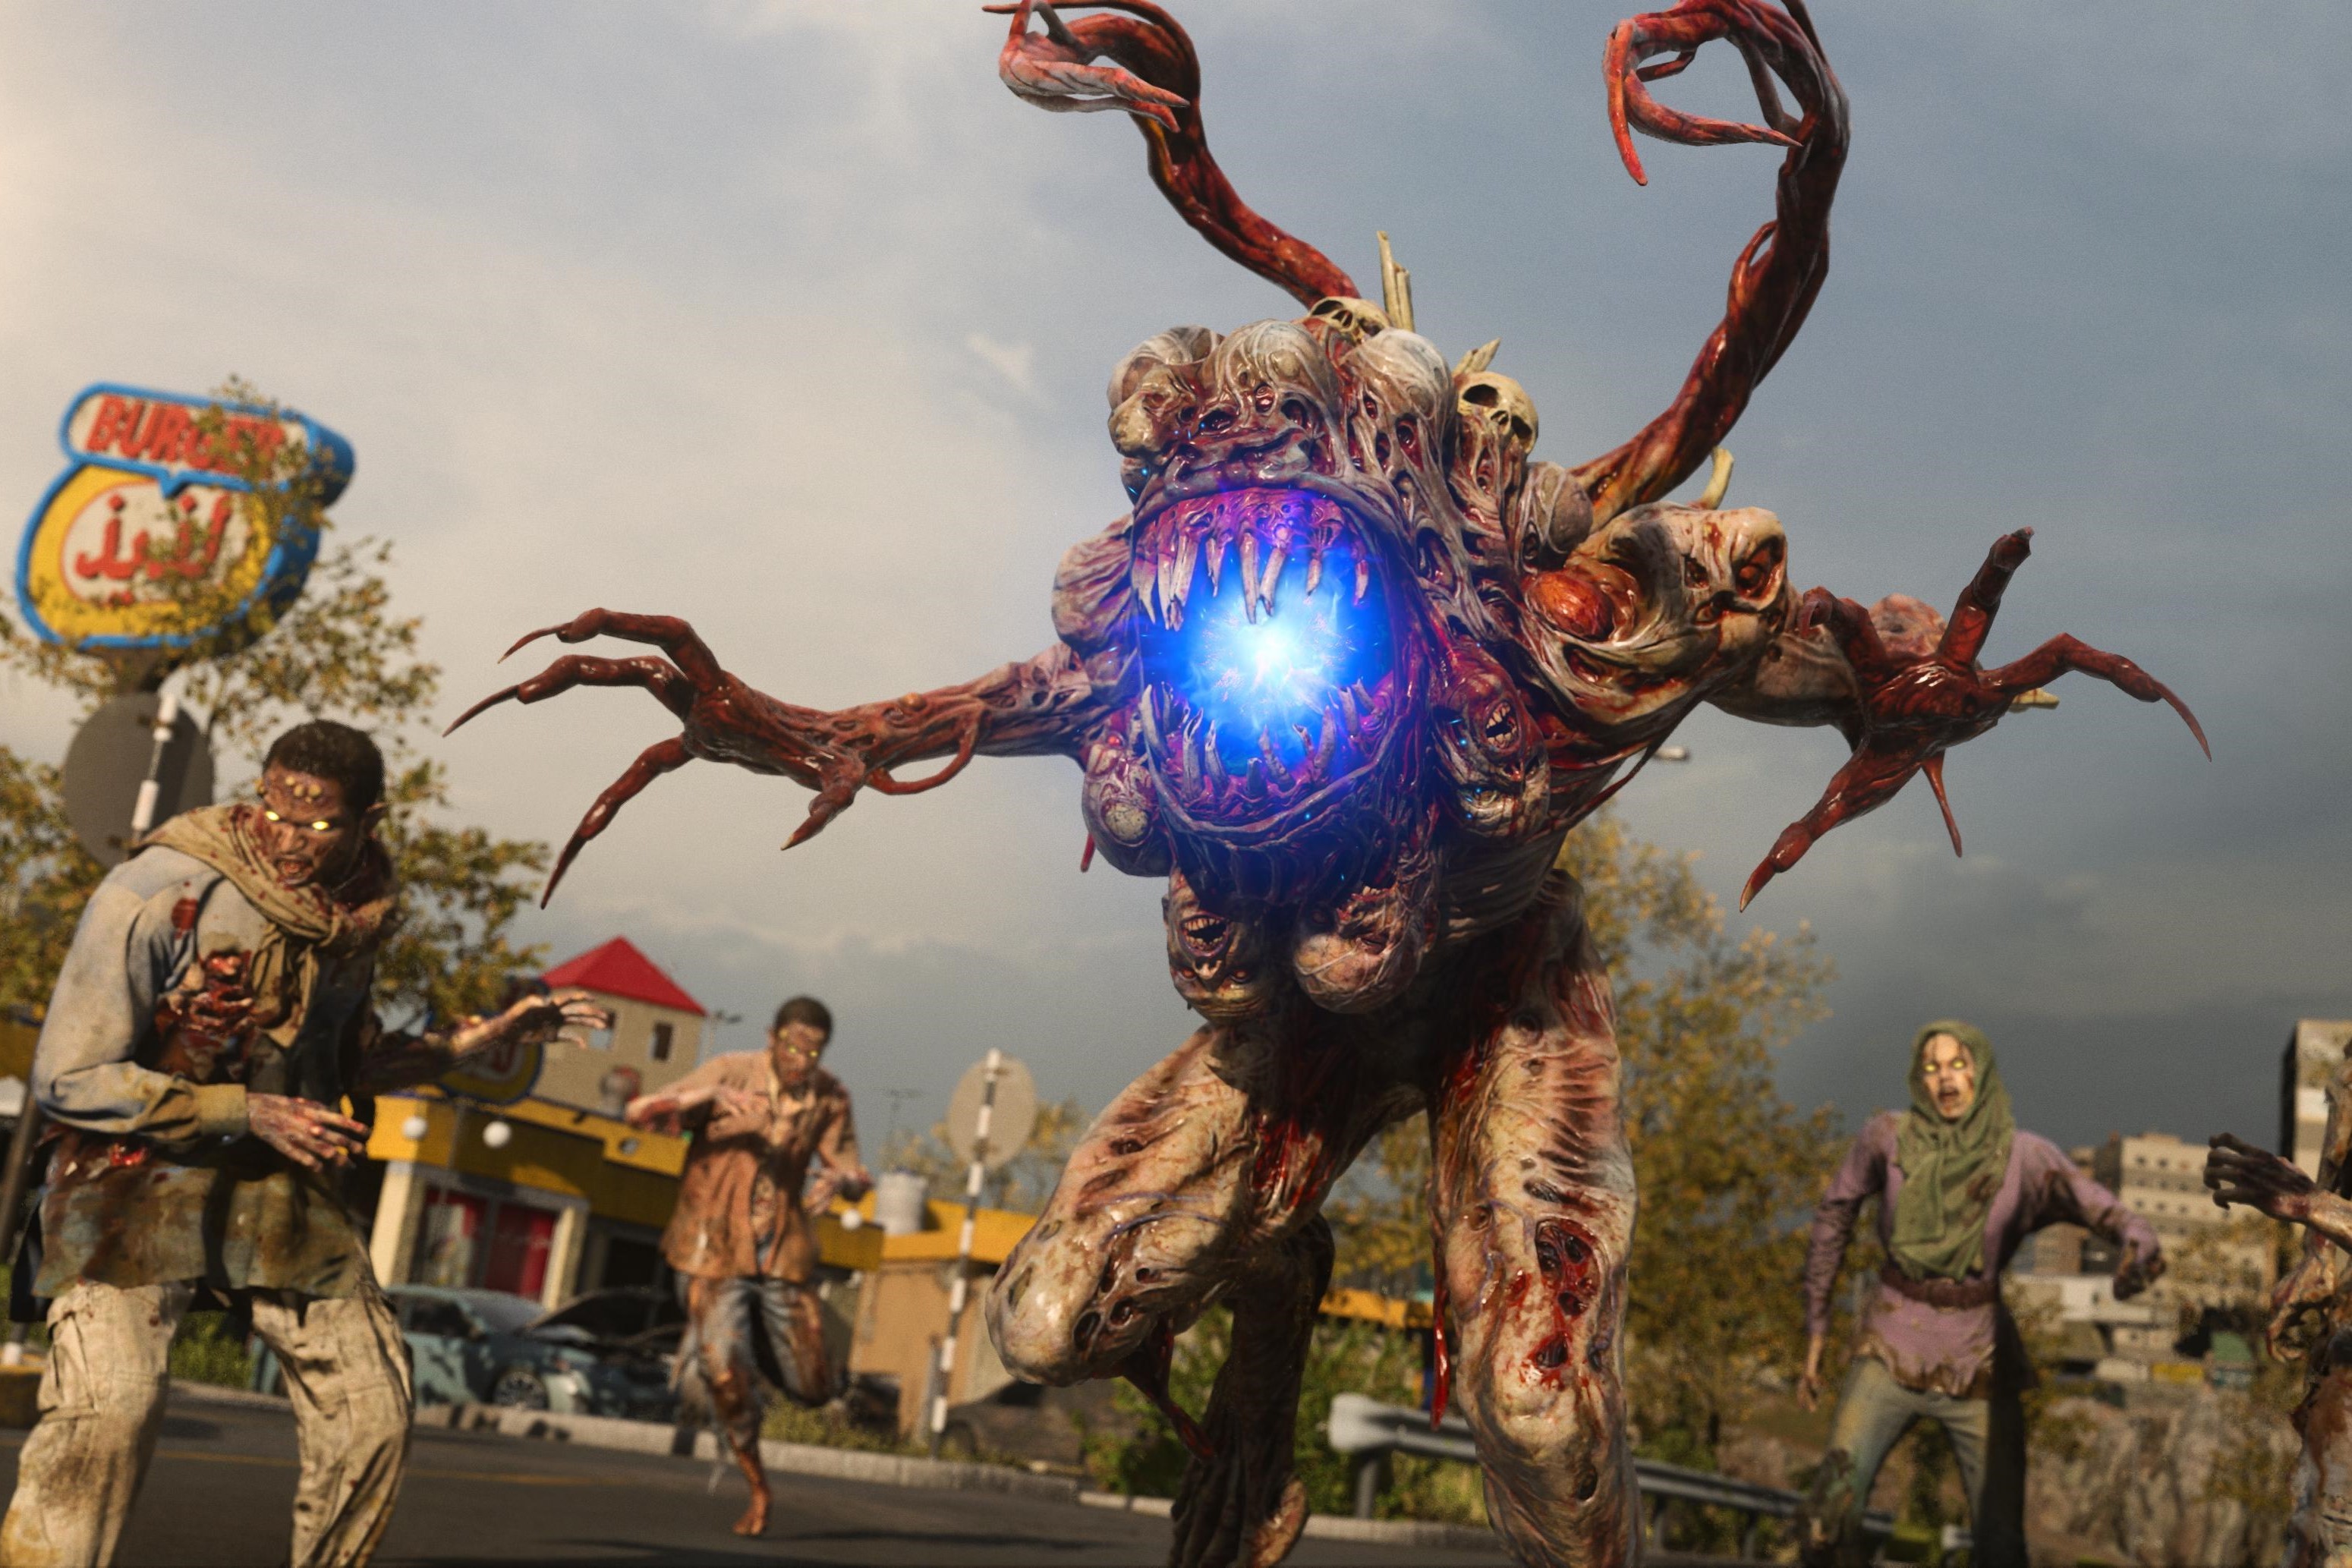 Call of Duty Modern Warfare 3 Zombies - with one giant mutant zombie screaming